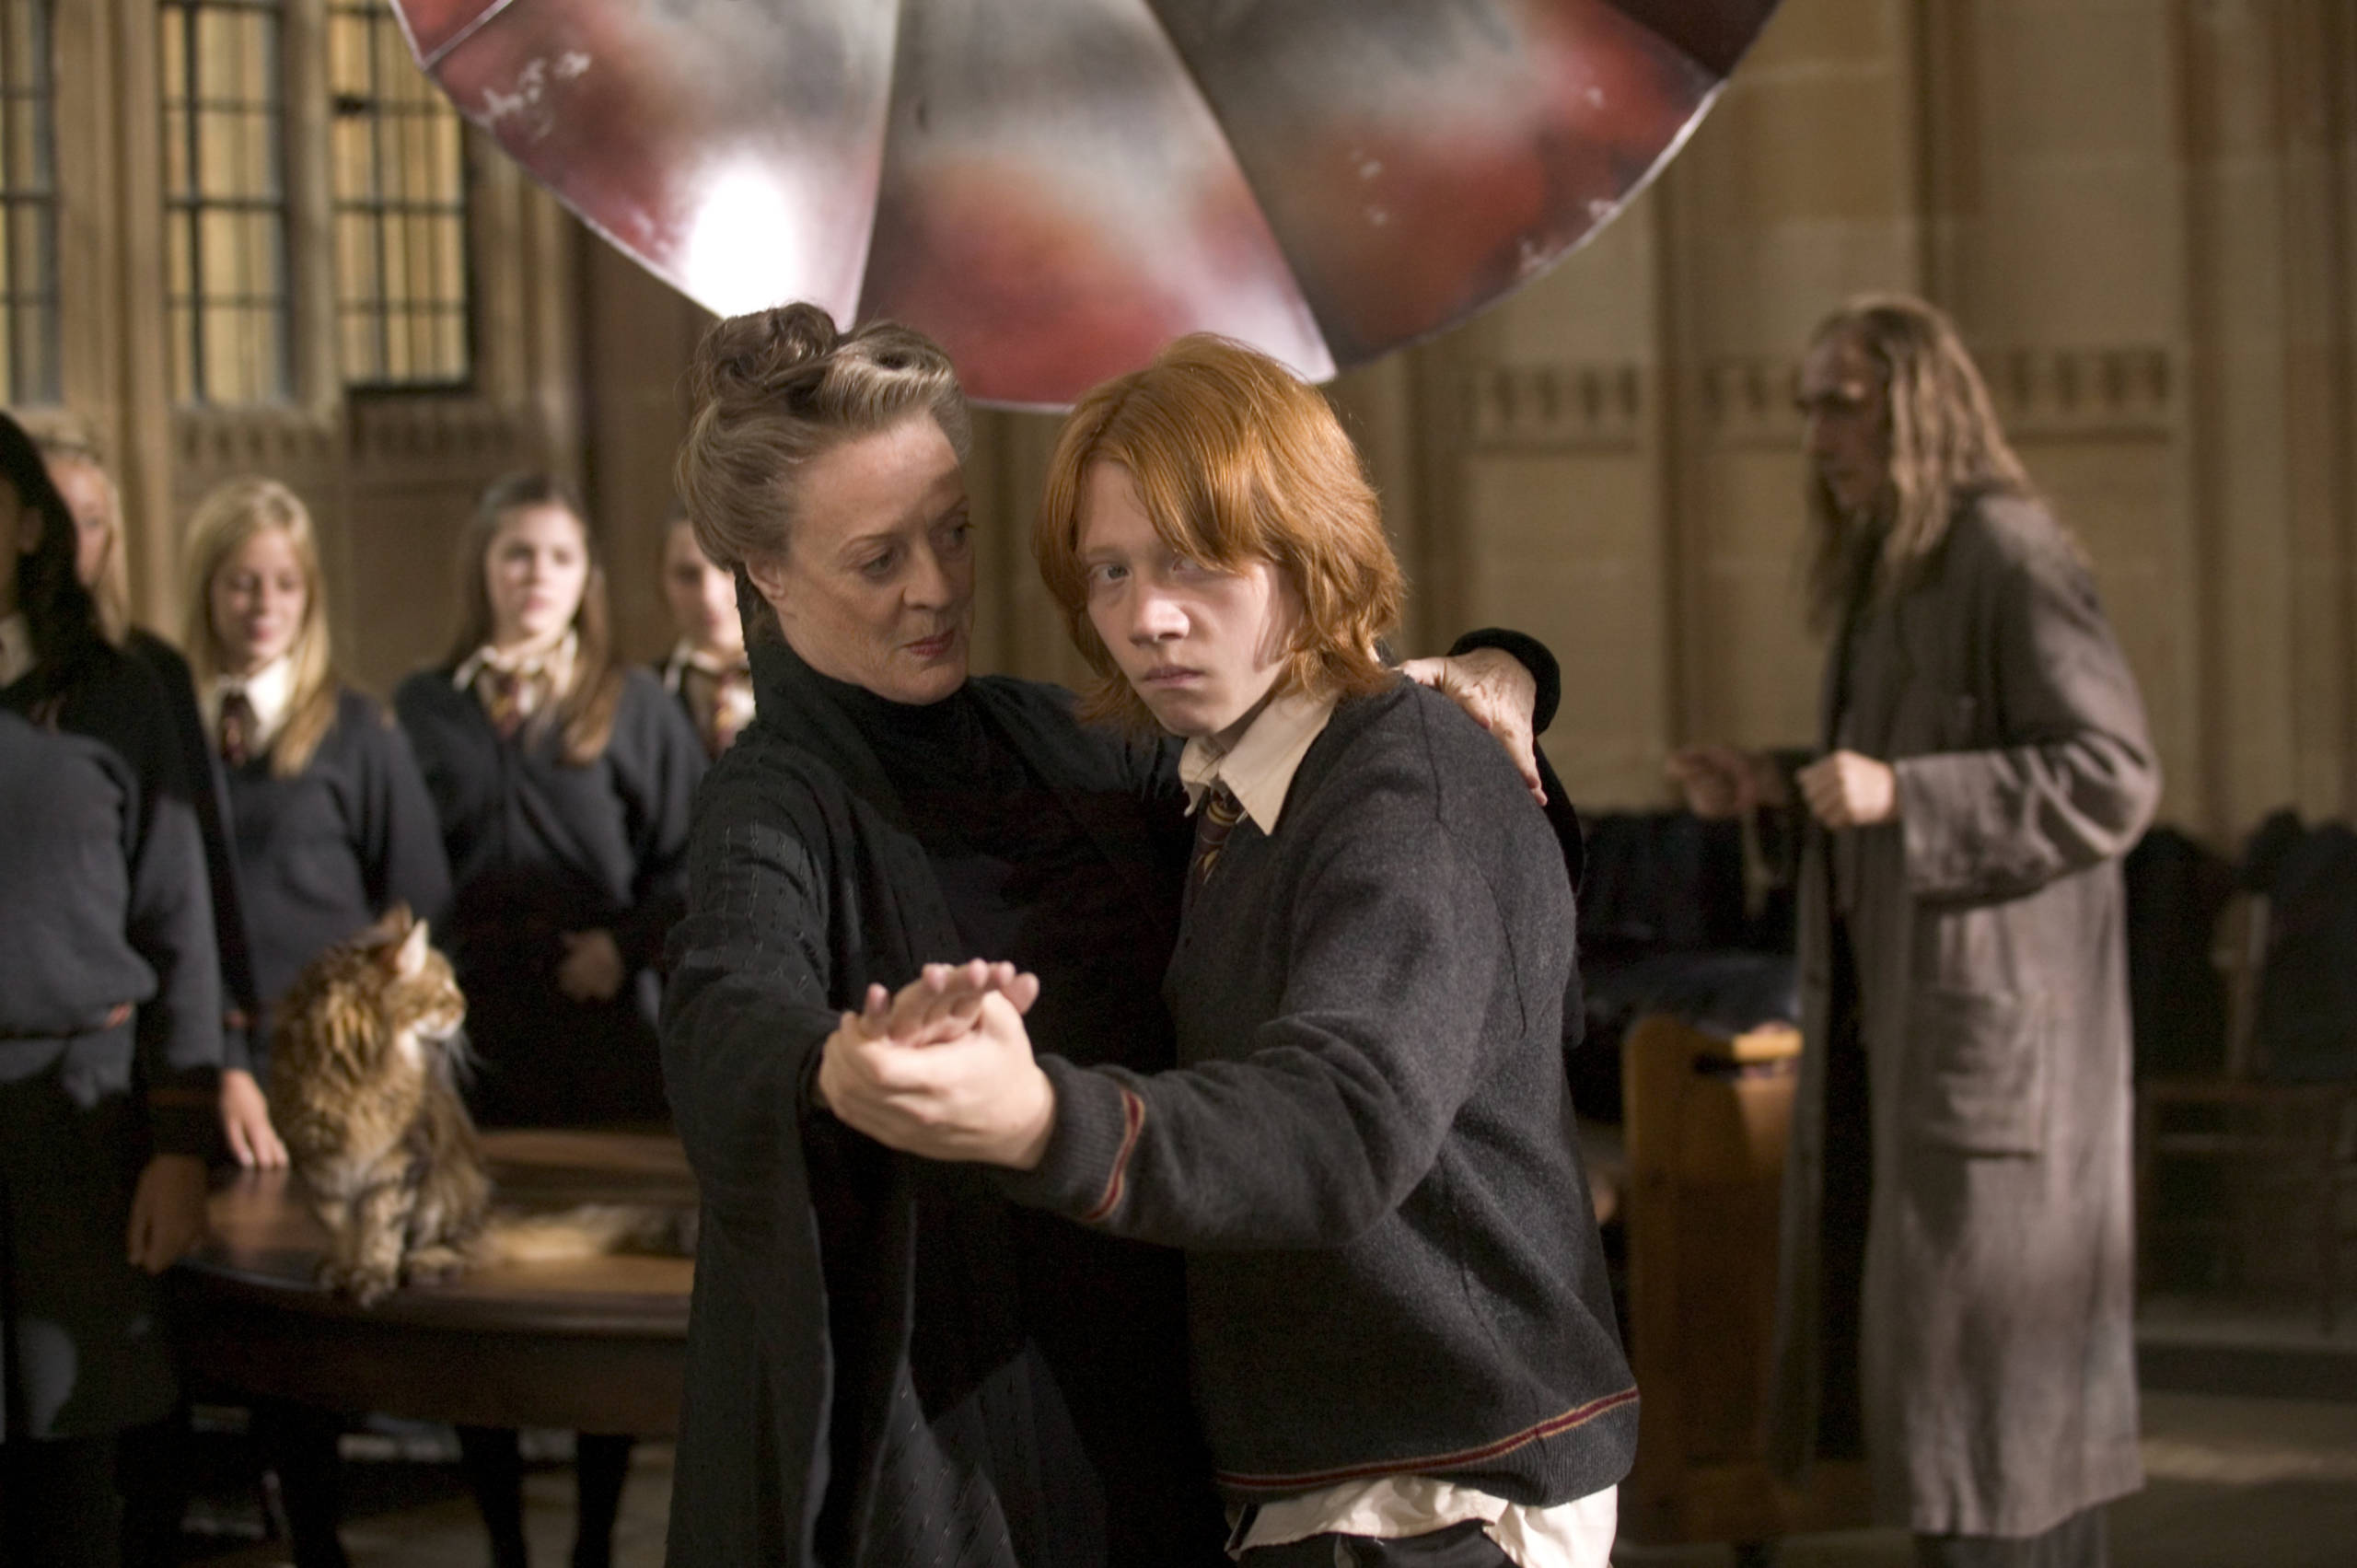 Ron dancing with Professor McGonagall from the Goblet of Fire 